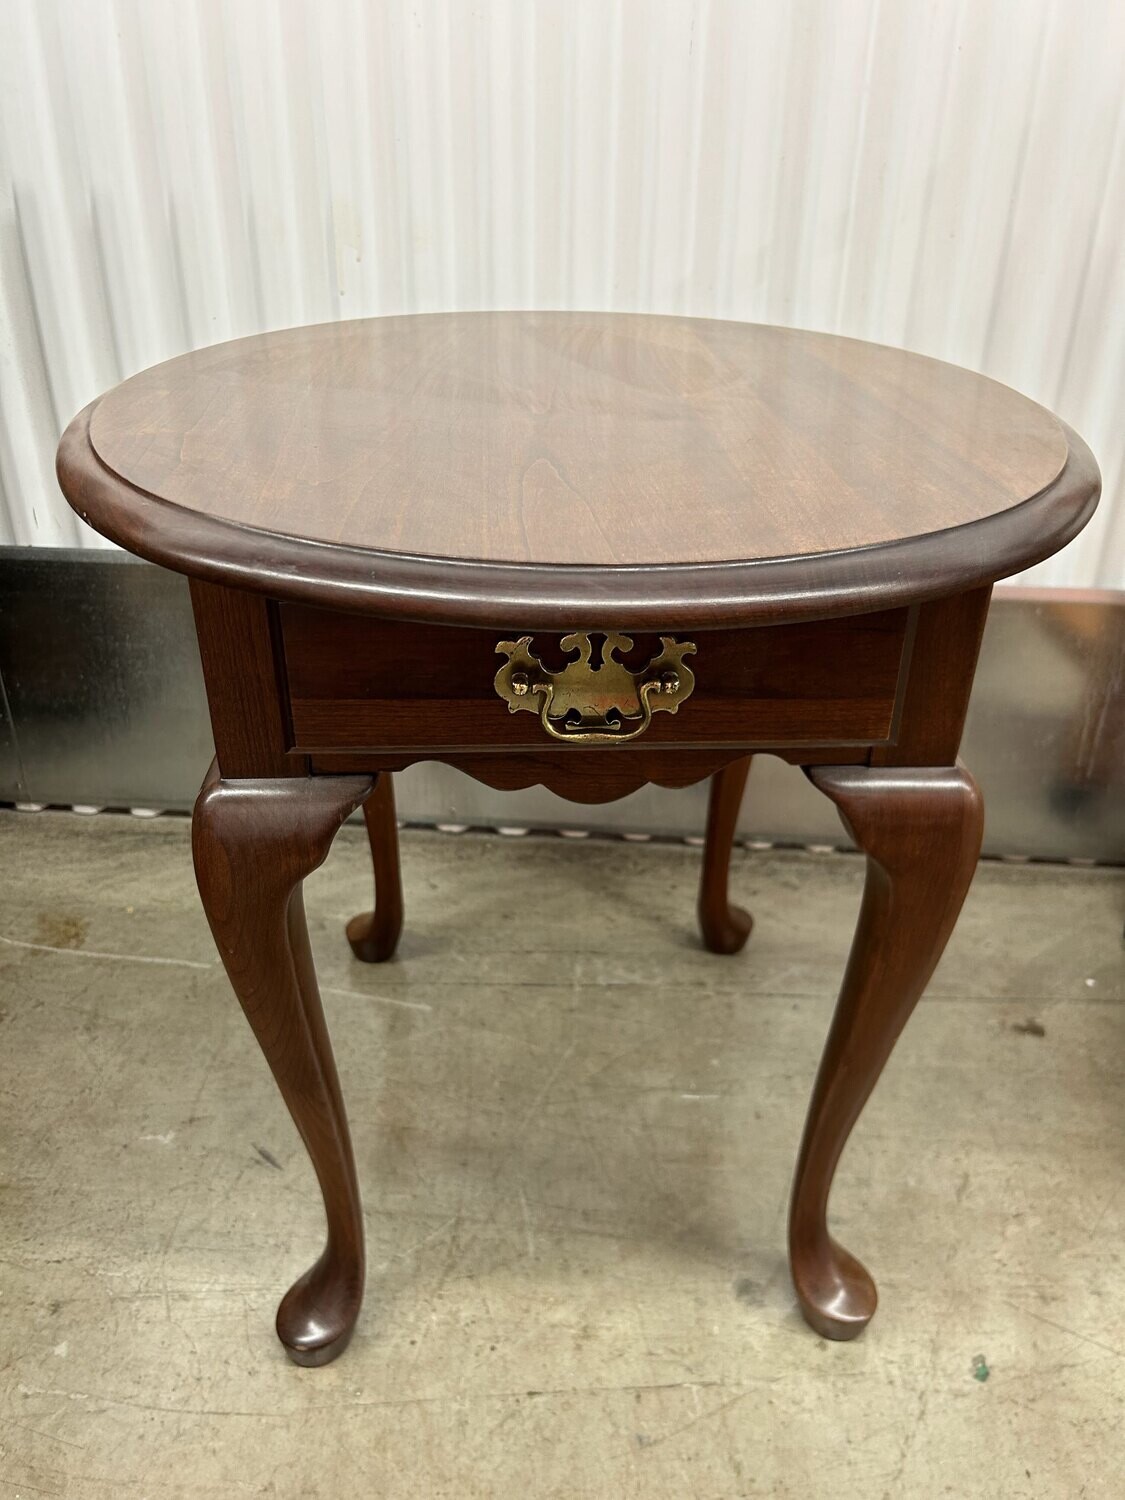 ** PA House Oval Cherry End Table #2214 ** 2 wks. to sell, full price